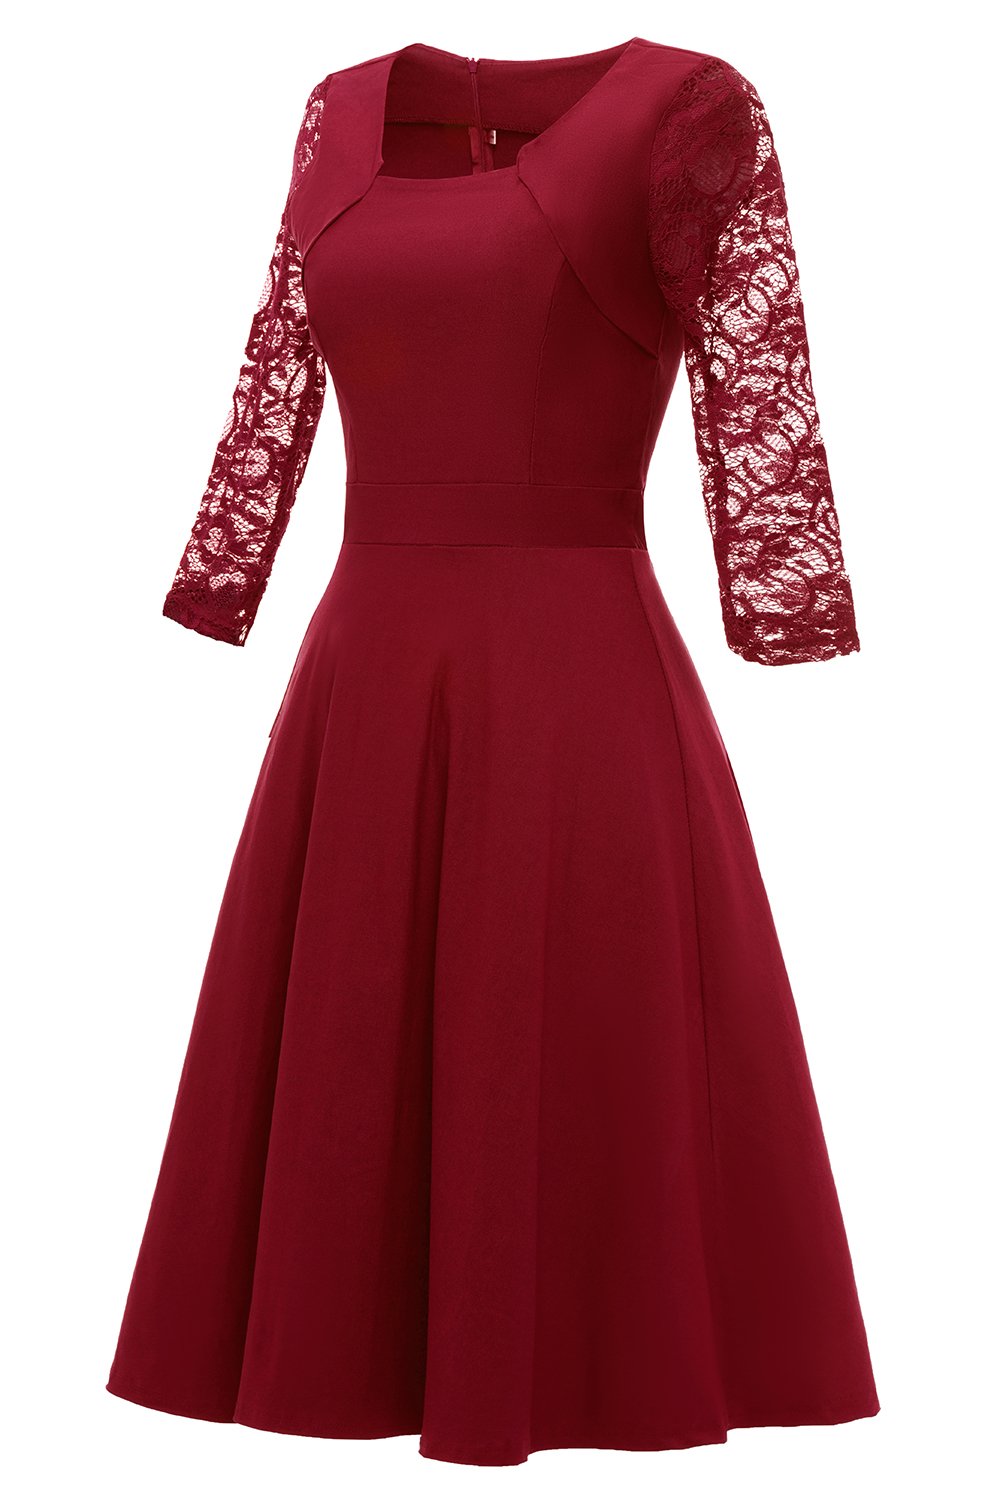 Burgundy Lace Dress with Long Sleeves